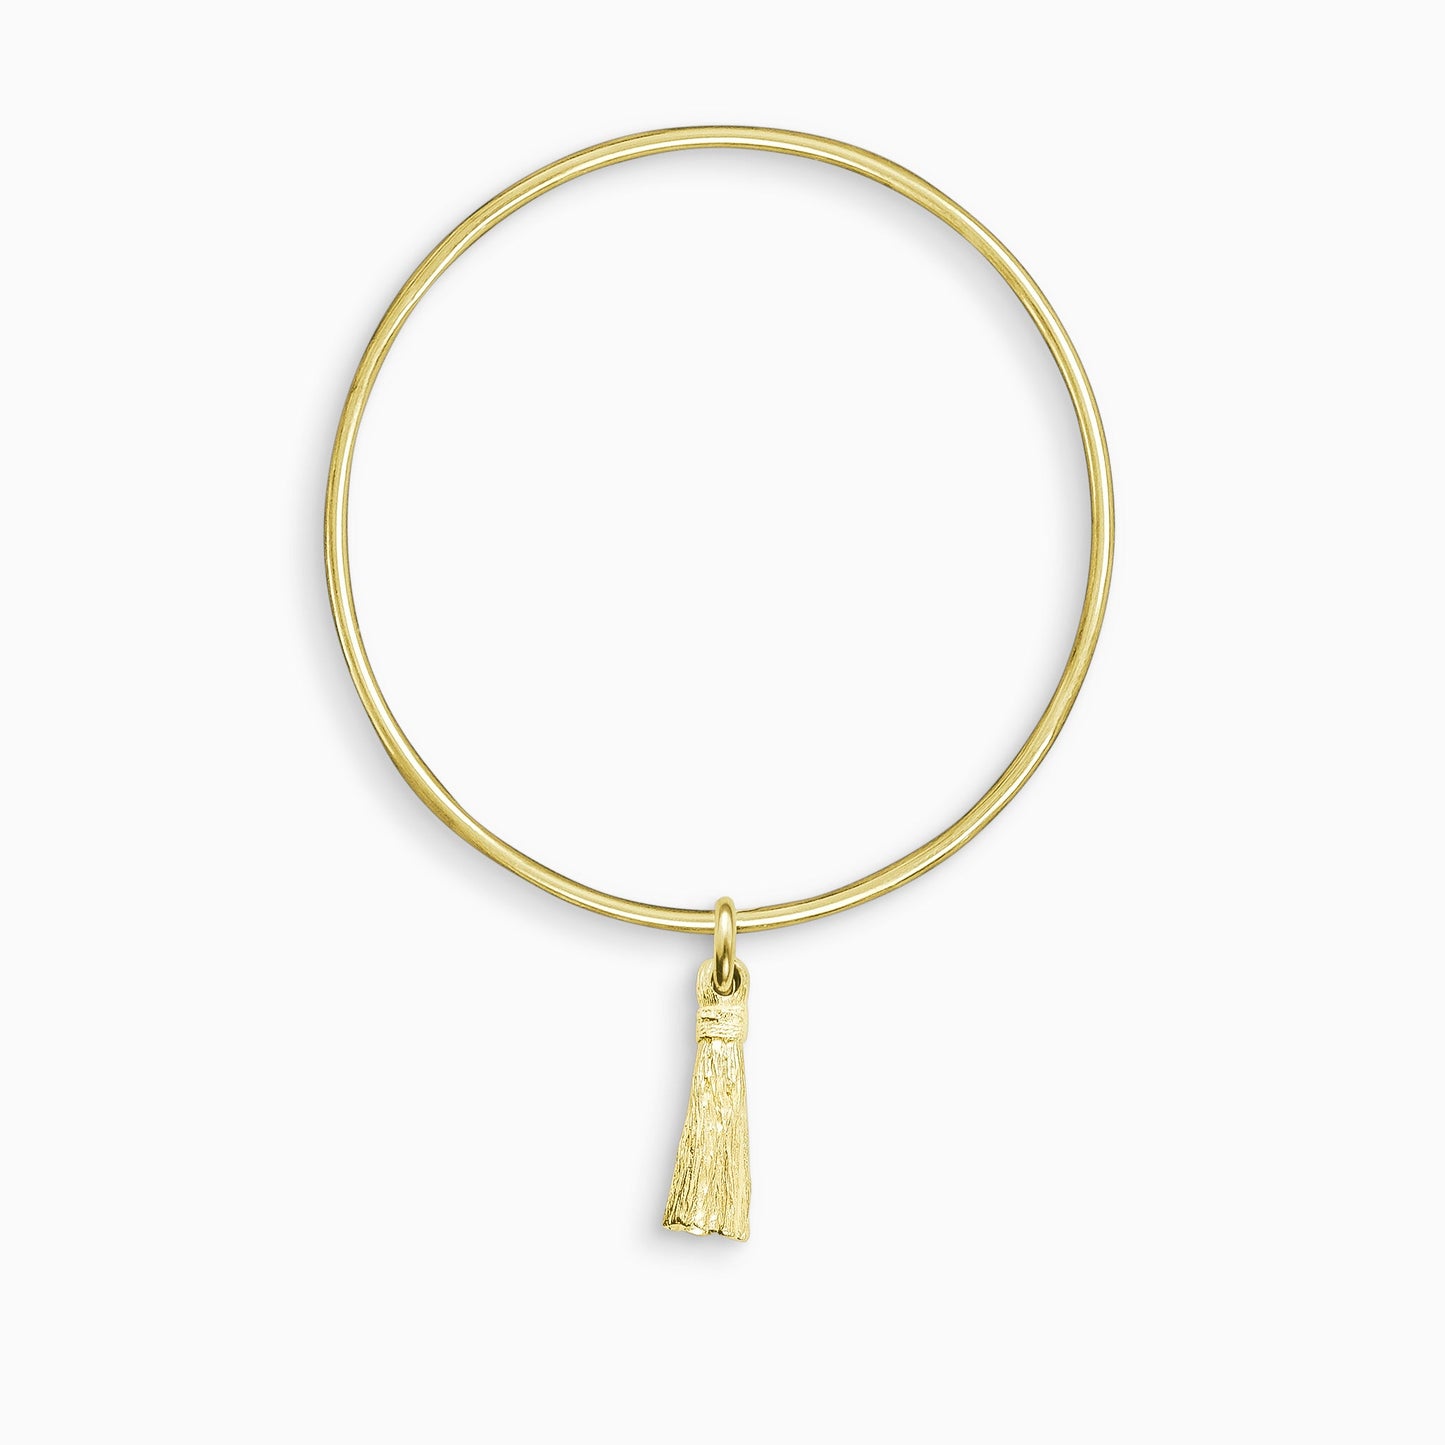 An 18ct Fairtrade yellow goldTassel charm, with the texture of an actual tassel, freely moving on a round wire bangle. Charm 25mm. Bangle 63mm inside diameter x 2mm round wire.